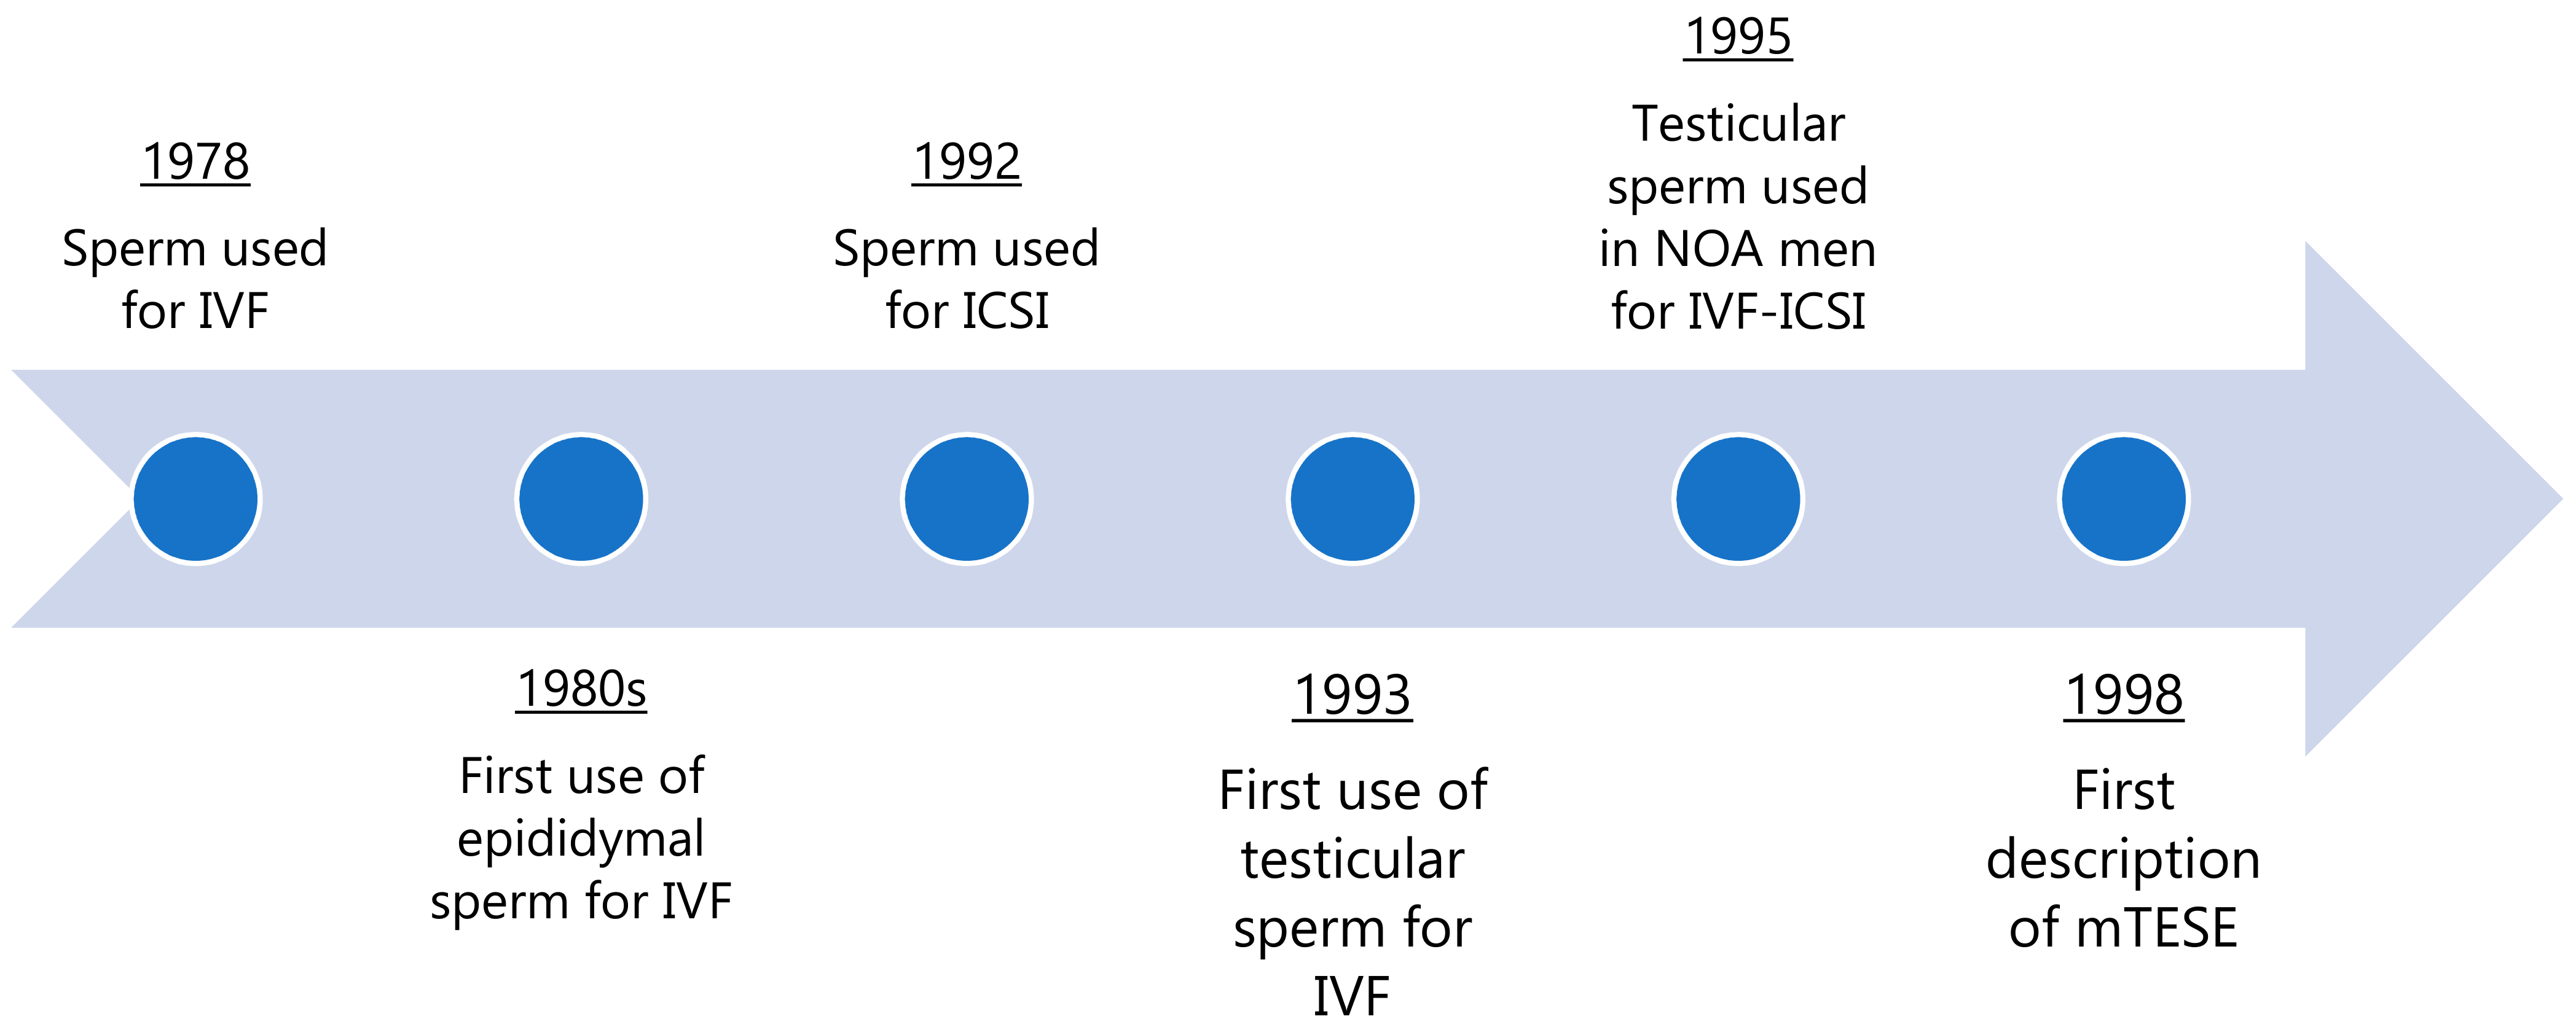 JCM | Free Full-Text | Two from the Introduction of Microdissection Testicular Sperm Extraction: How This Surgical Technique the Management of